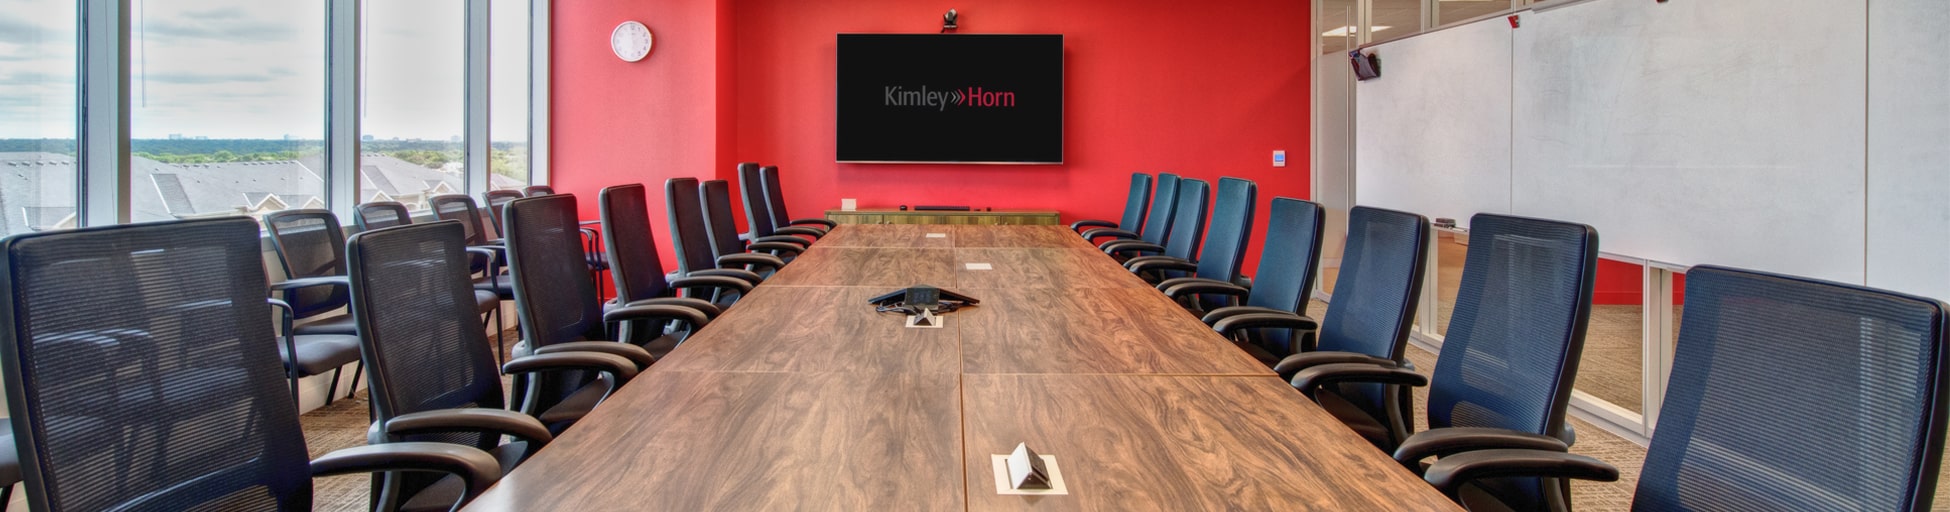 Kimley-Horn Training and Professional Development for Experienced Professionals